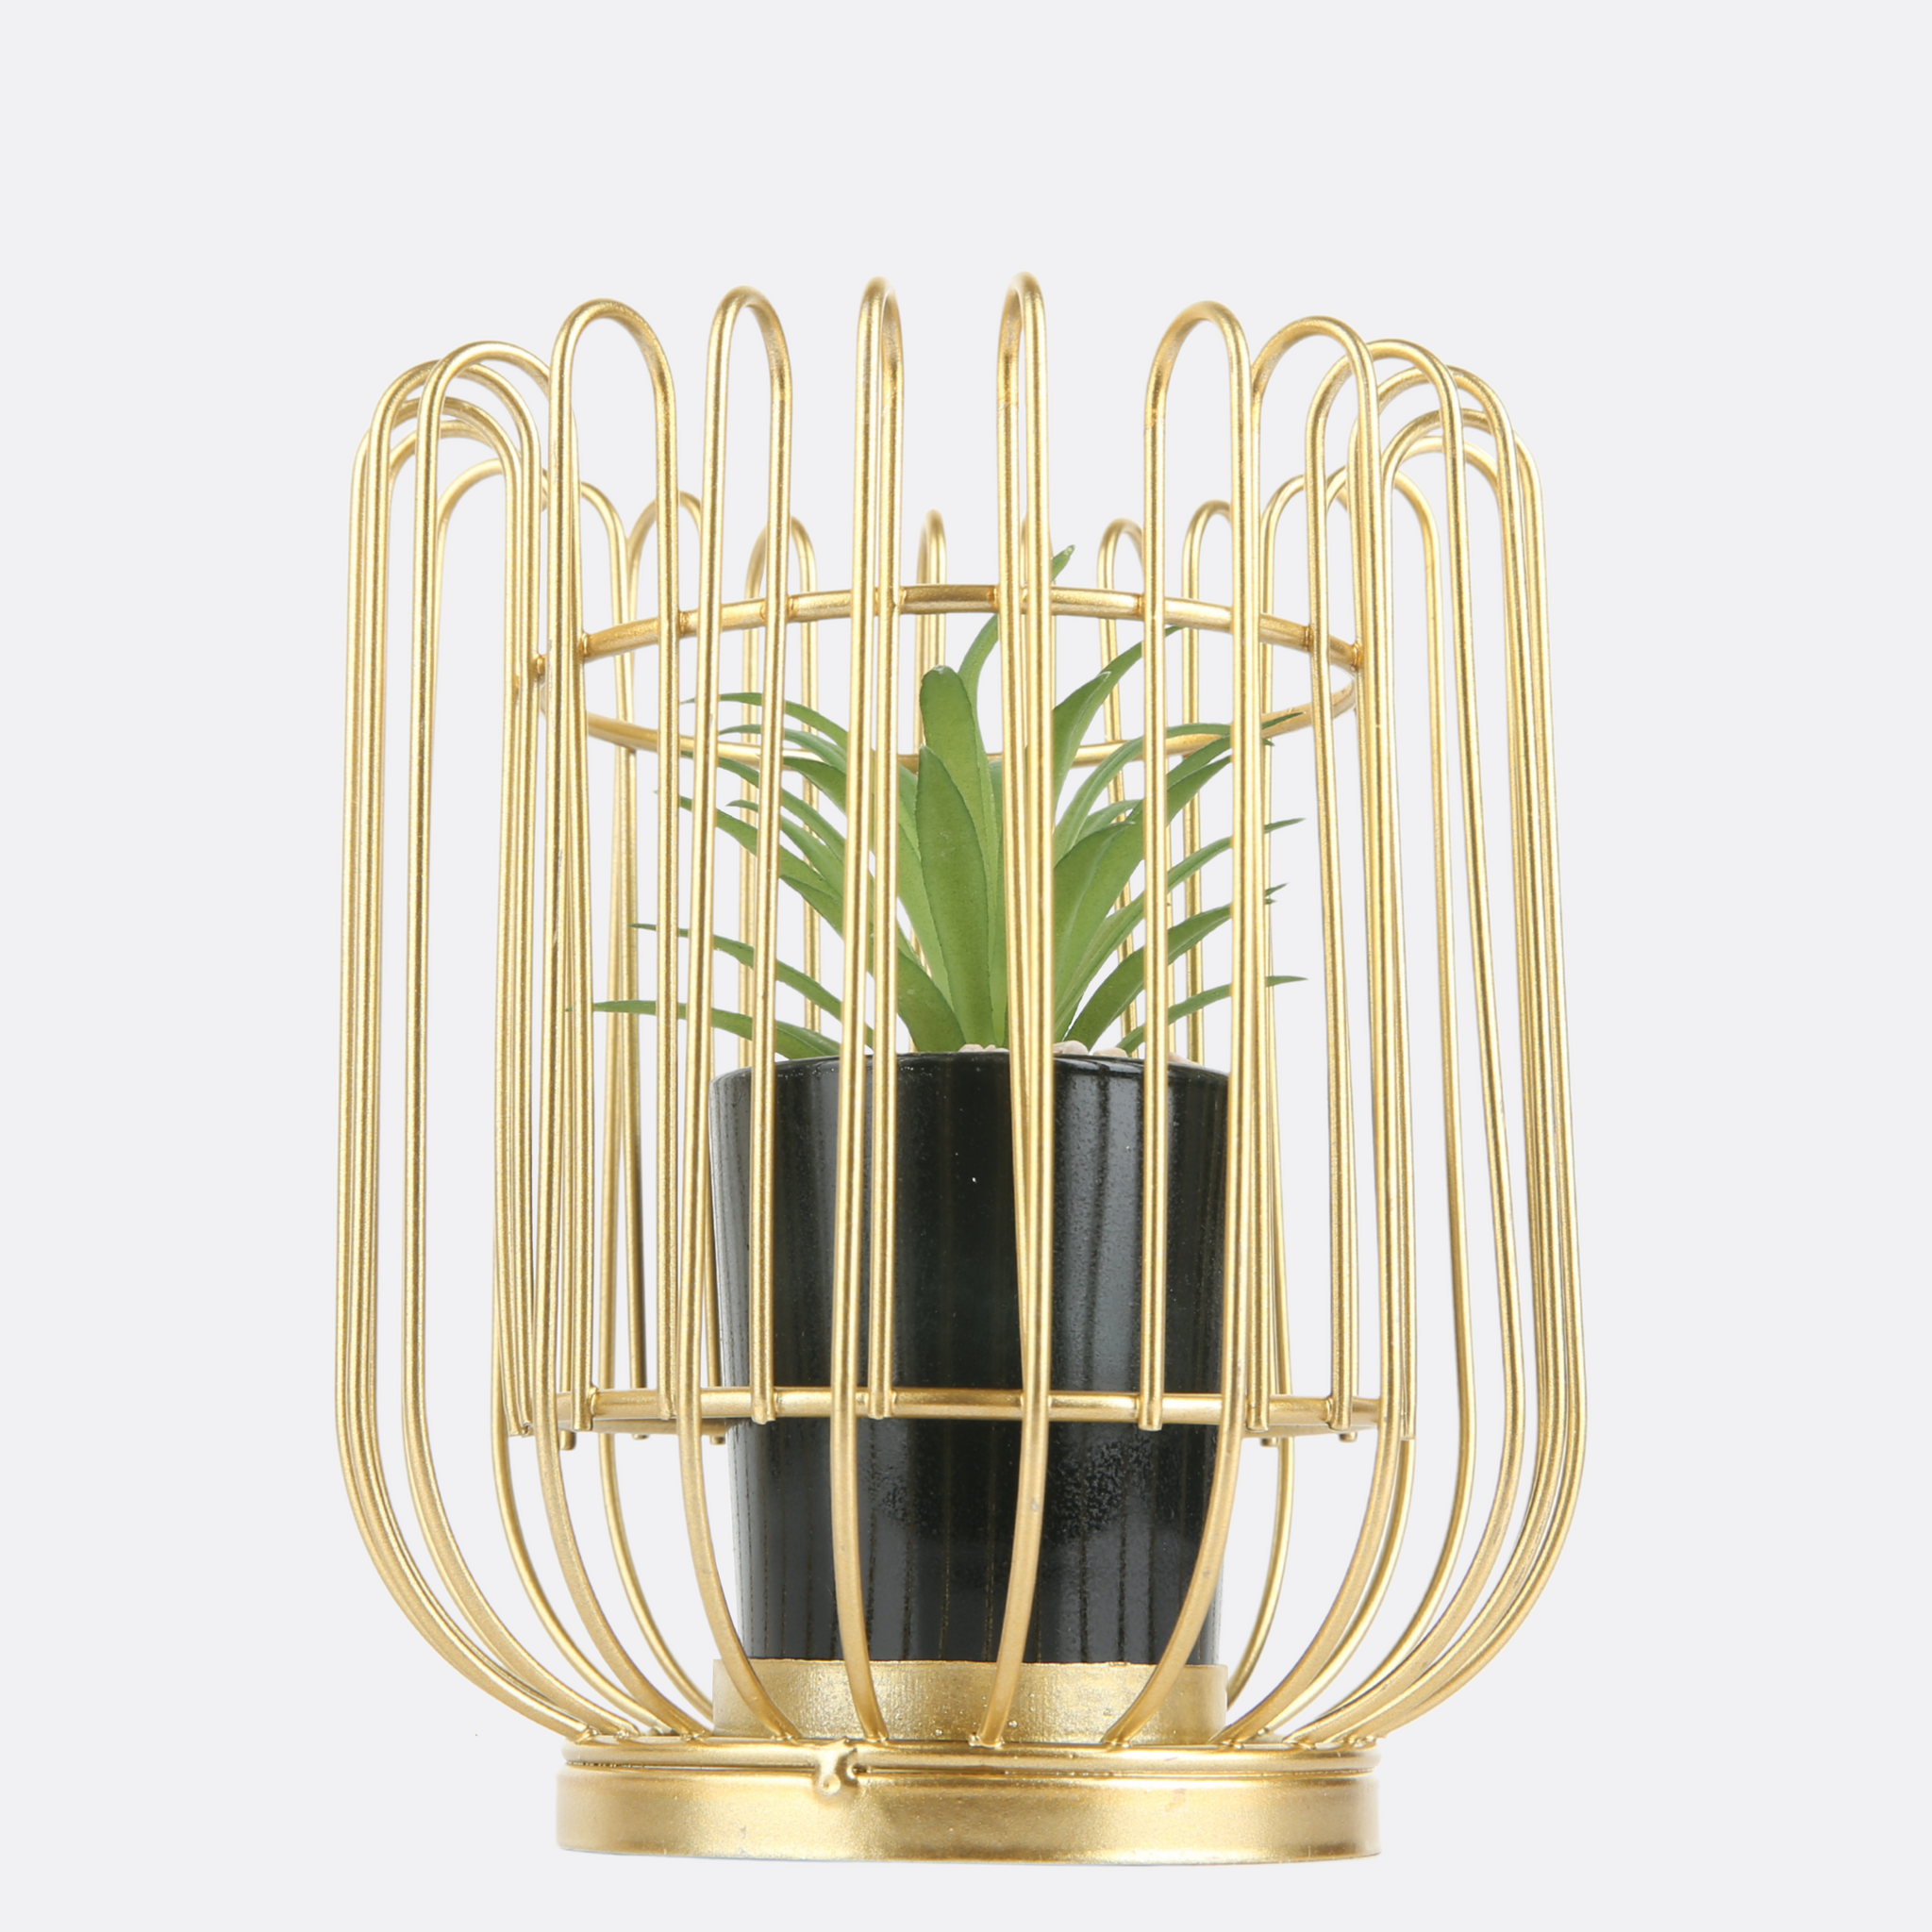 Planter With Acute Metallic Structure